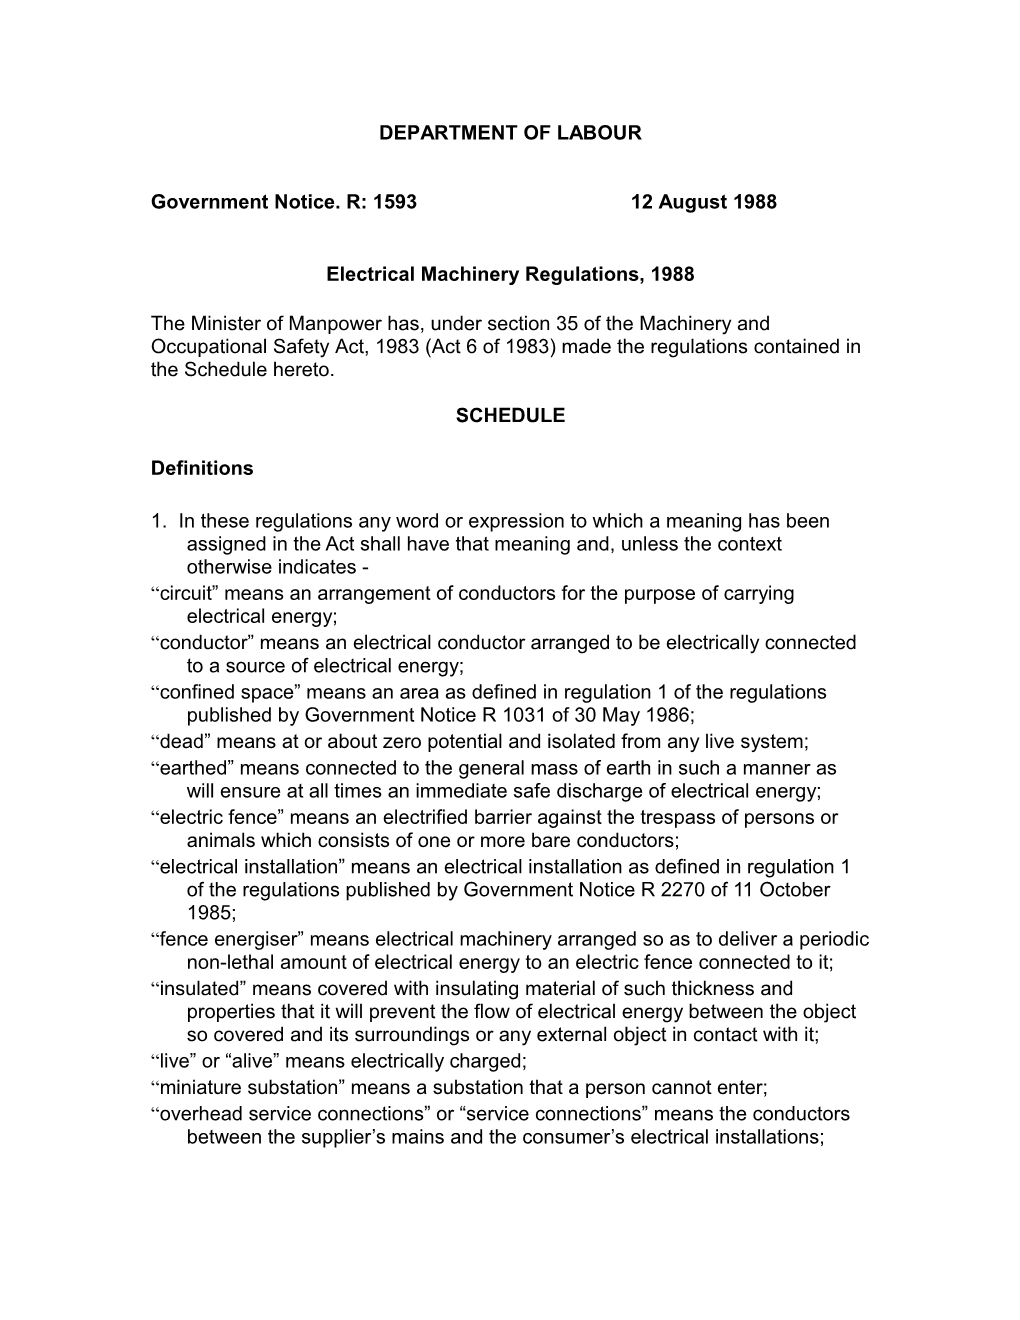 Electrical Machinery Regulations, 1988